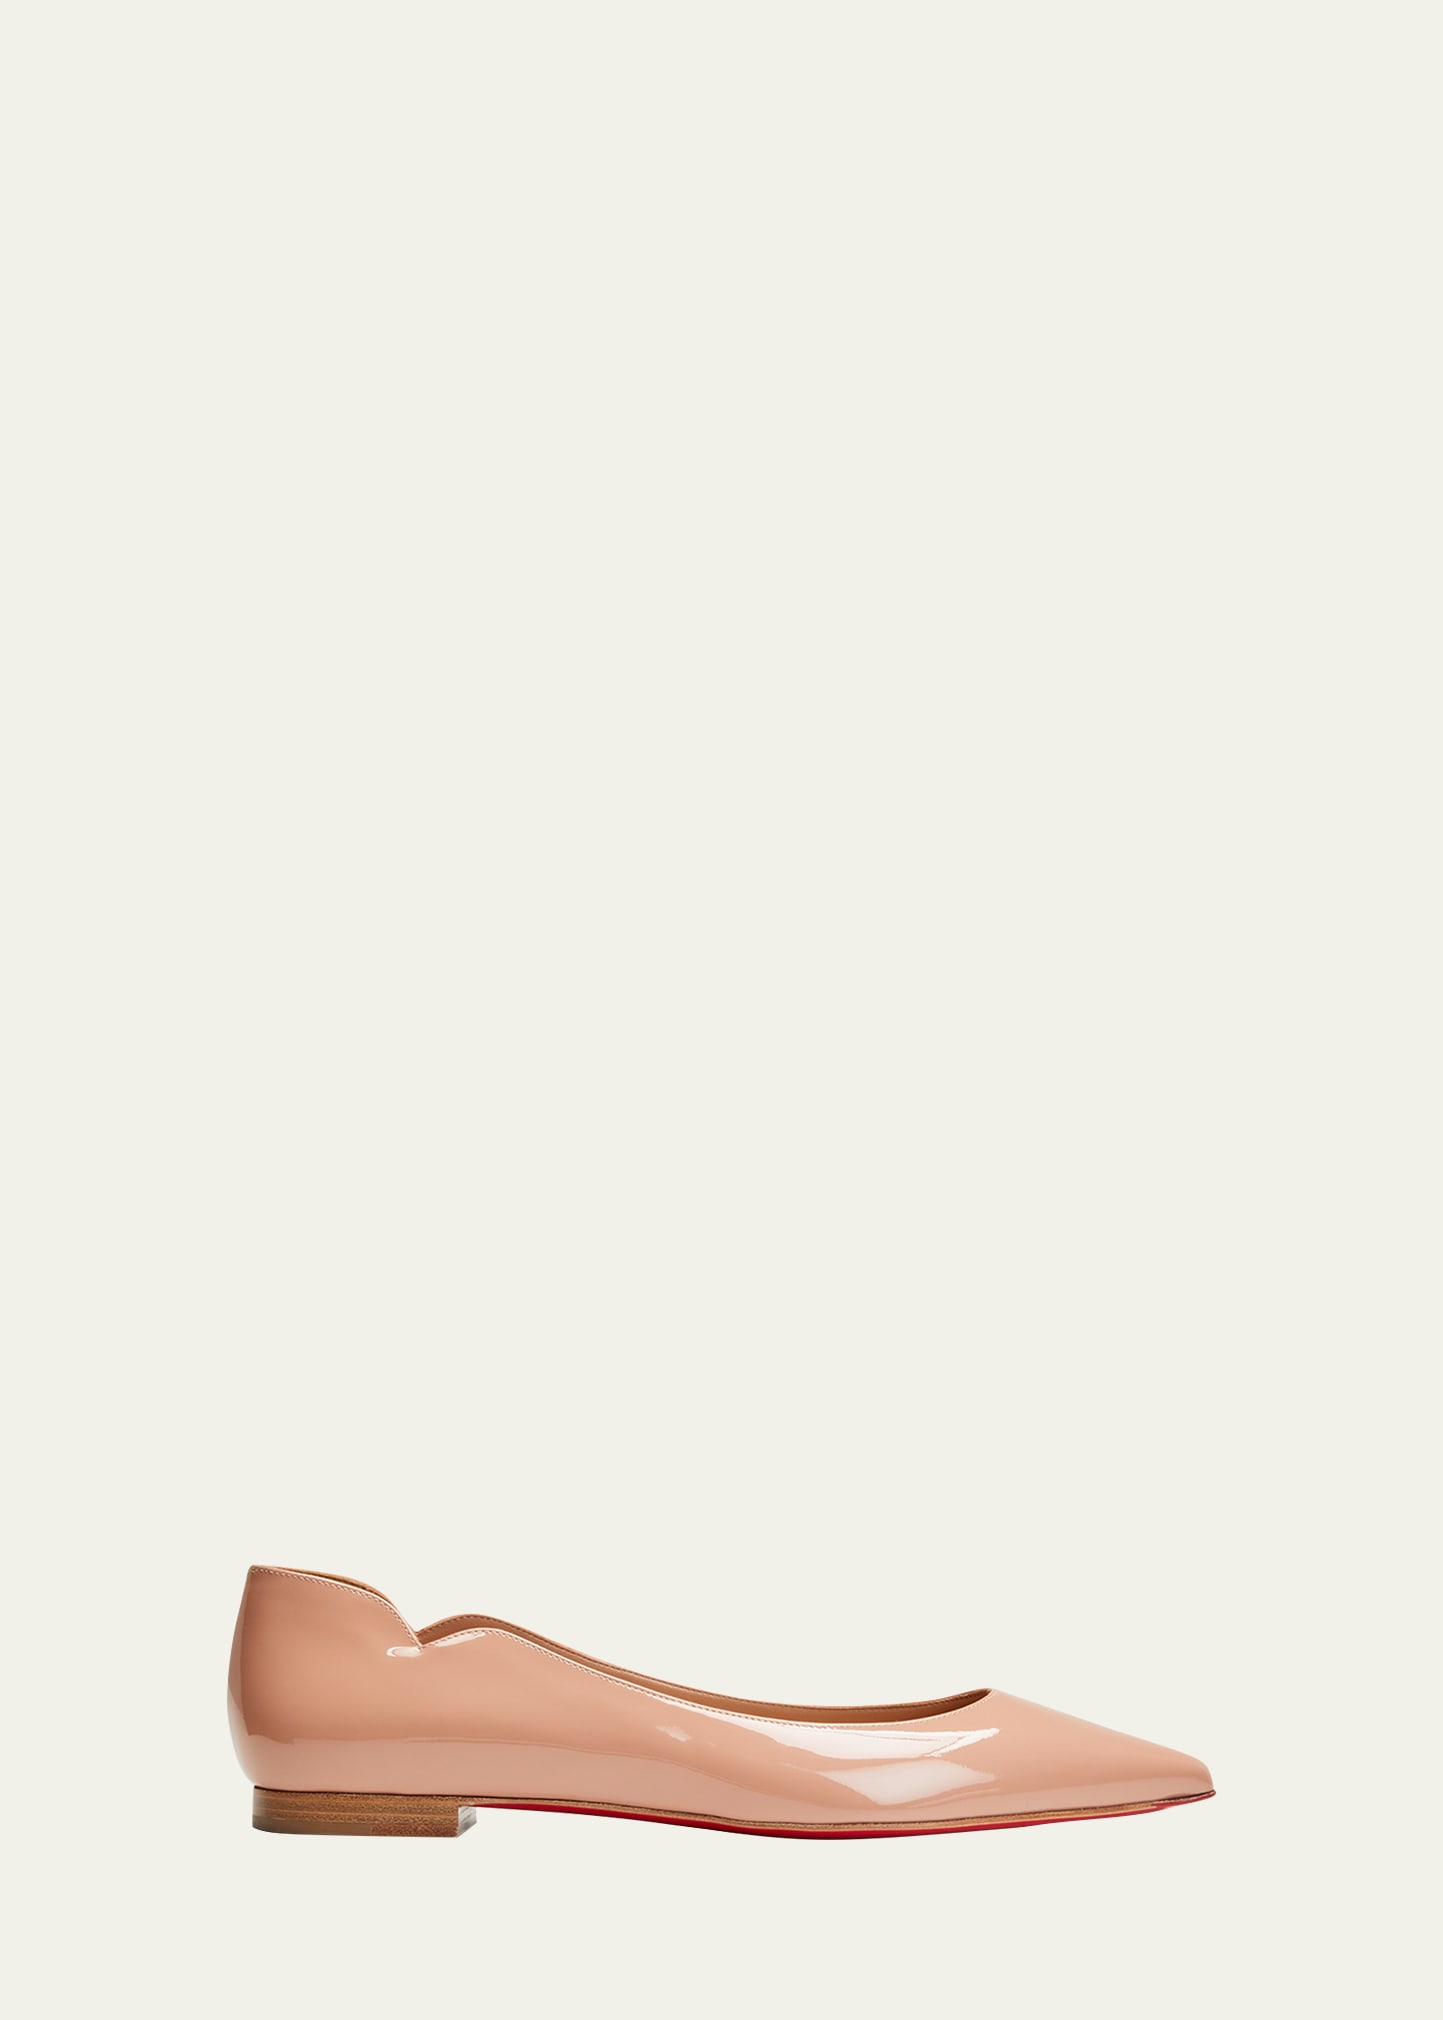 Christian Louboutin Hot Chickita Patent Red Sole Ballerina Flats In Blush